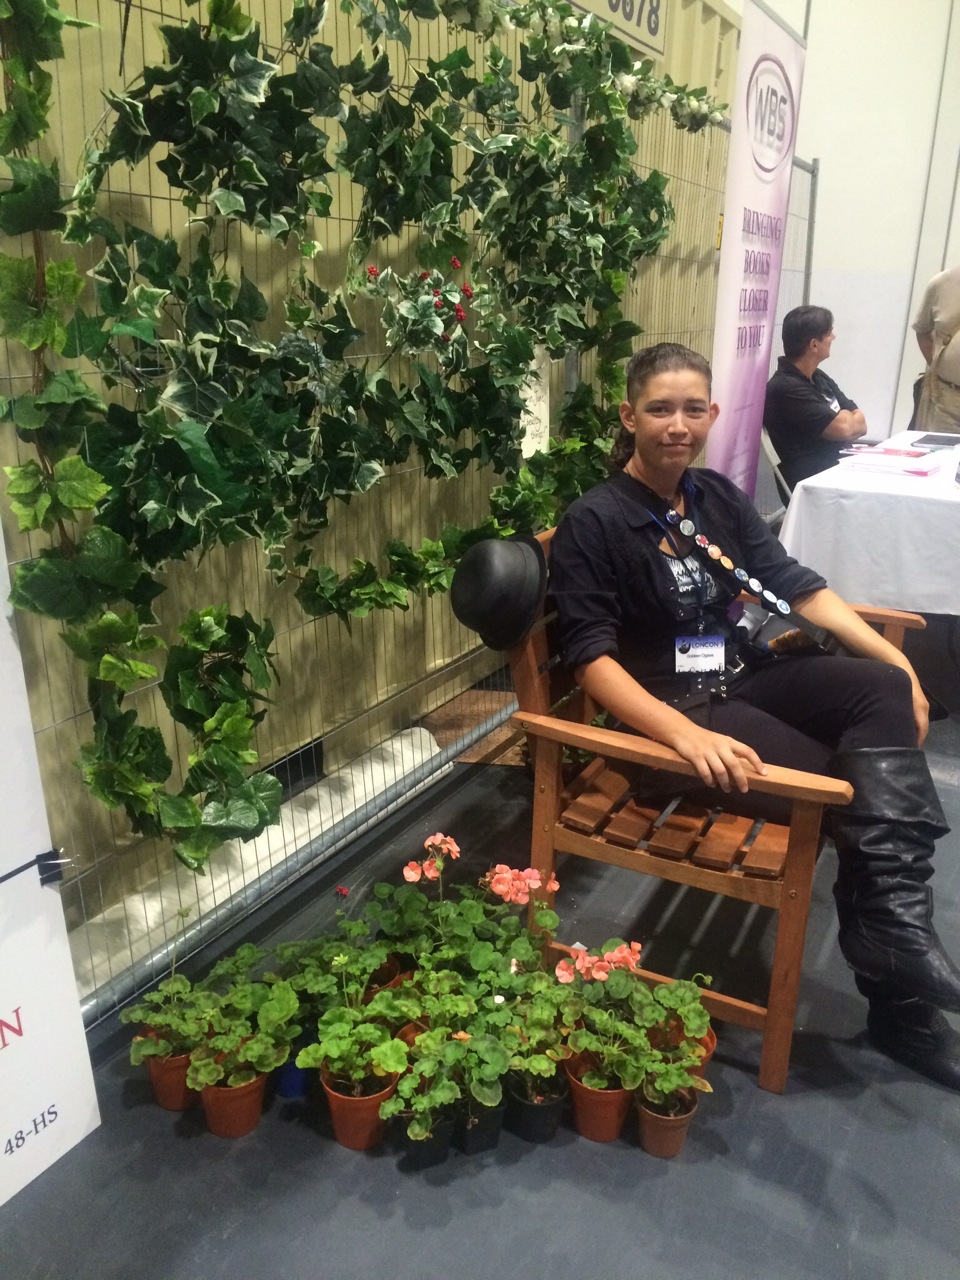 The author resting on the Diana Wynne Jones bench. Photo by the WM.